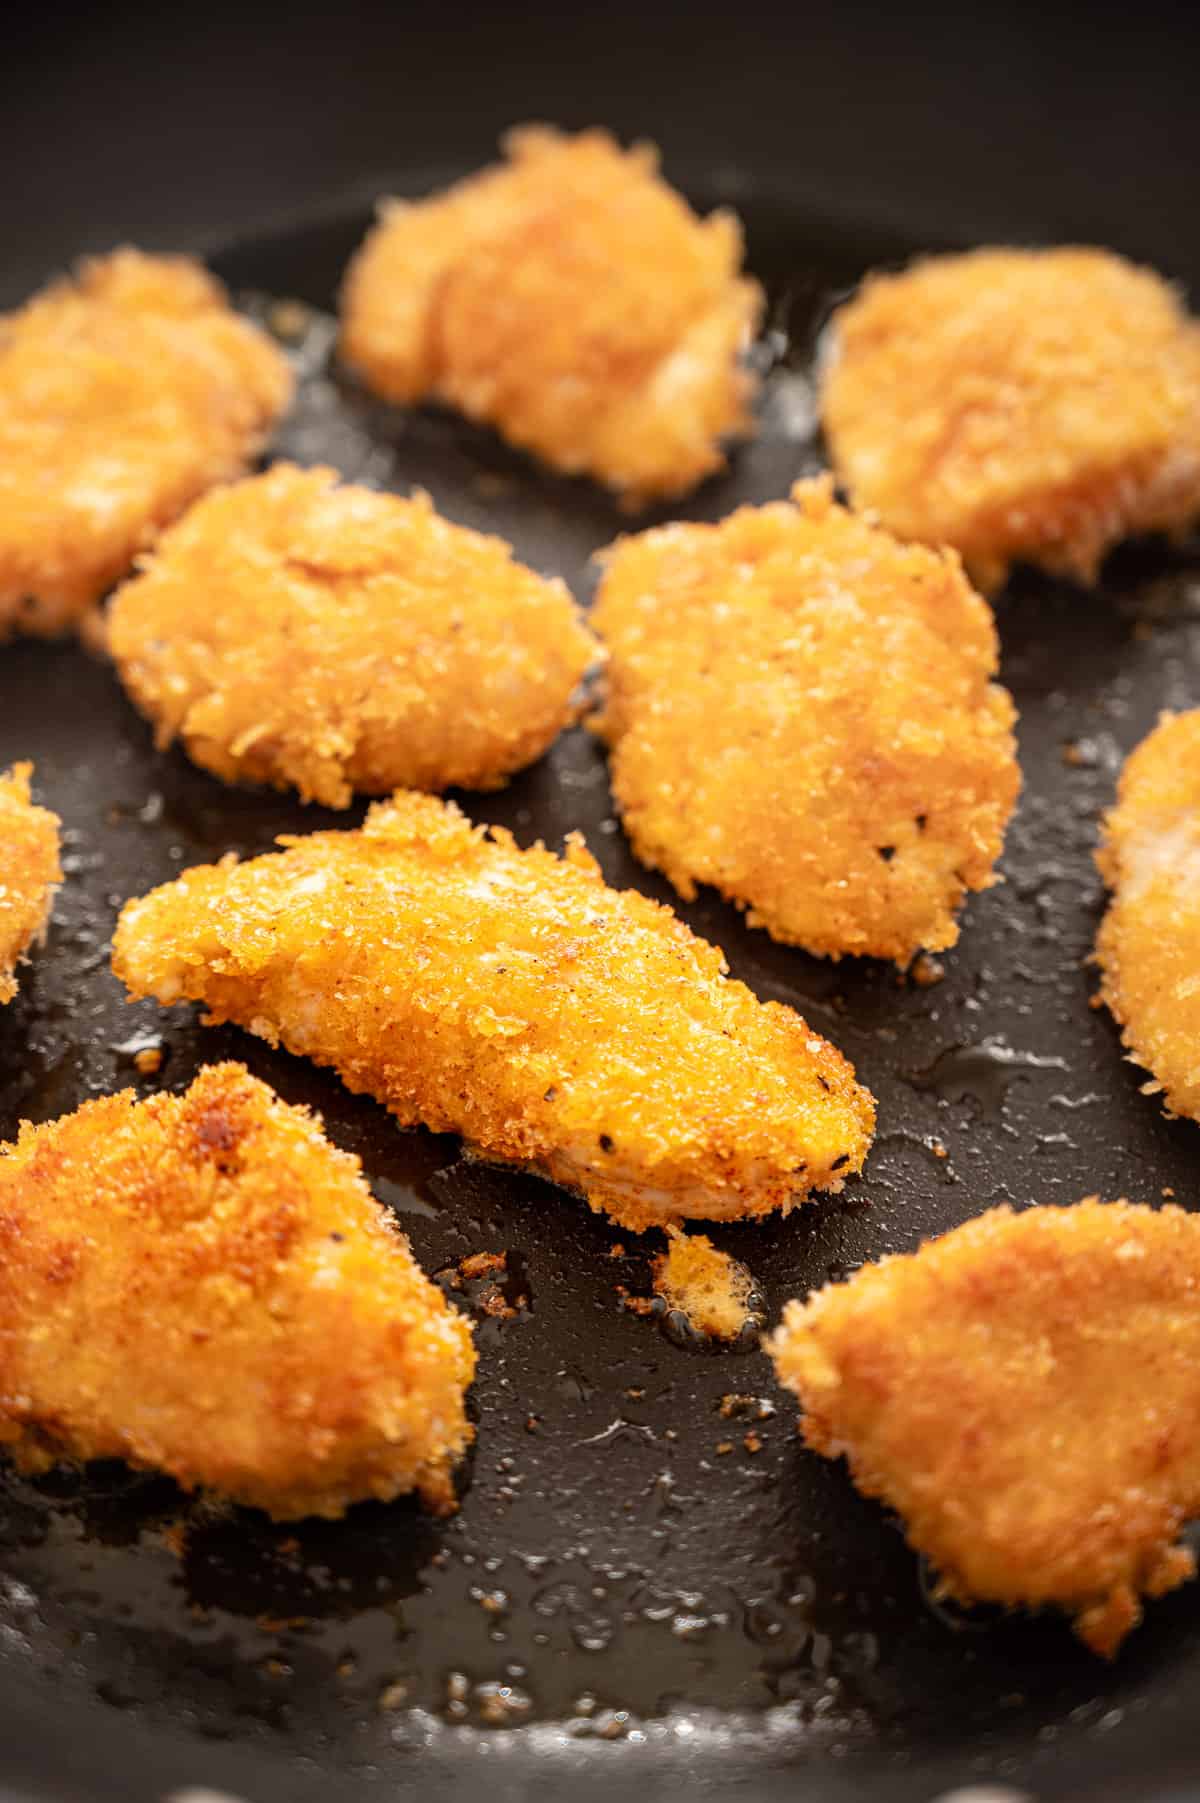 Chicken nuggets cooking in a pan to show crispy exterior.